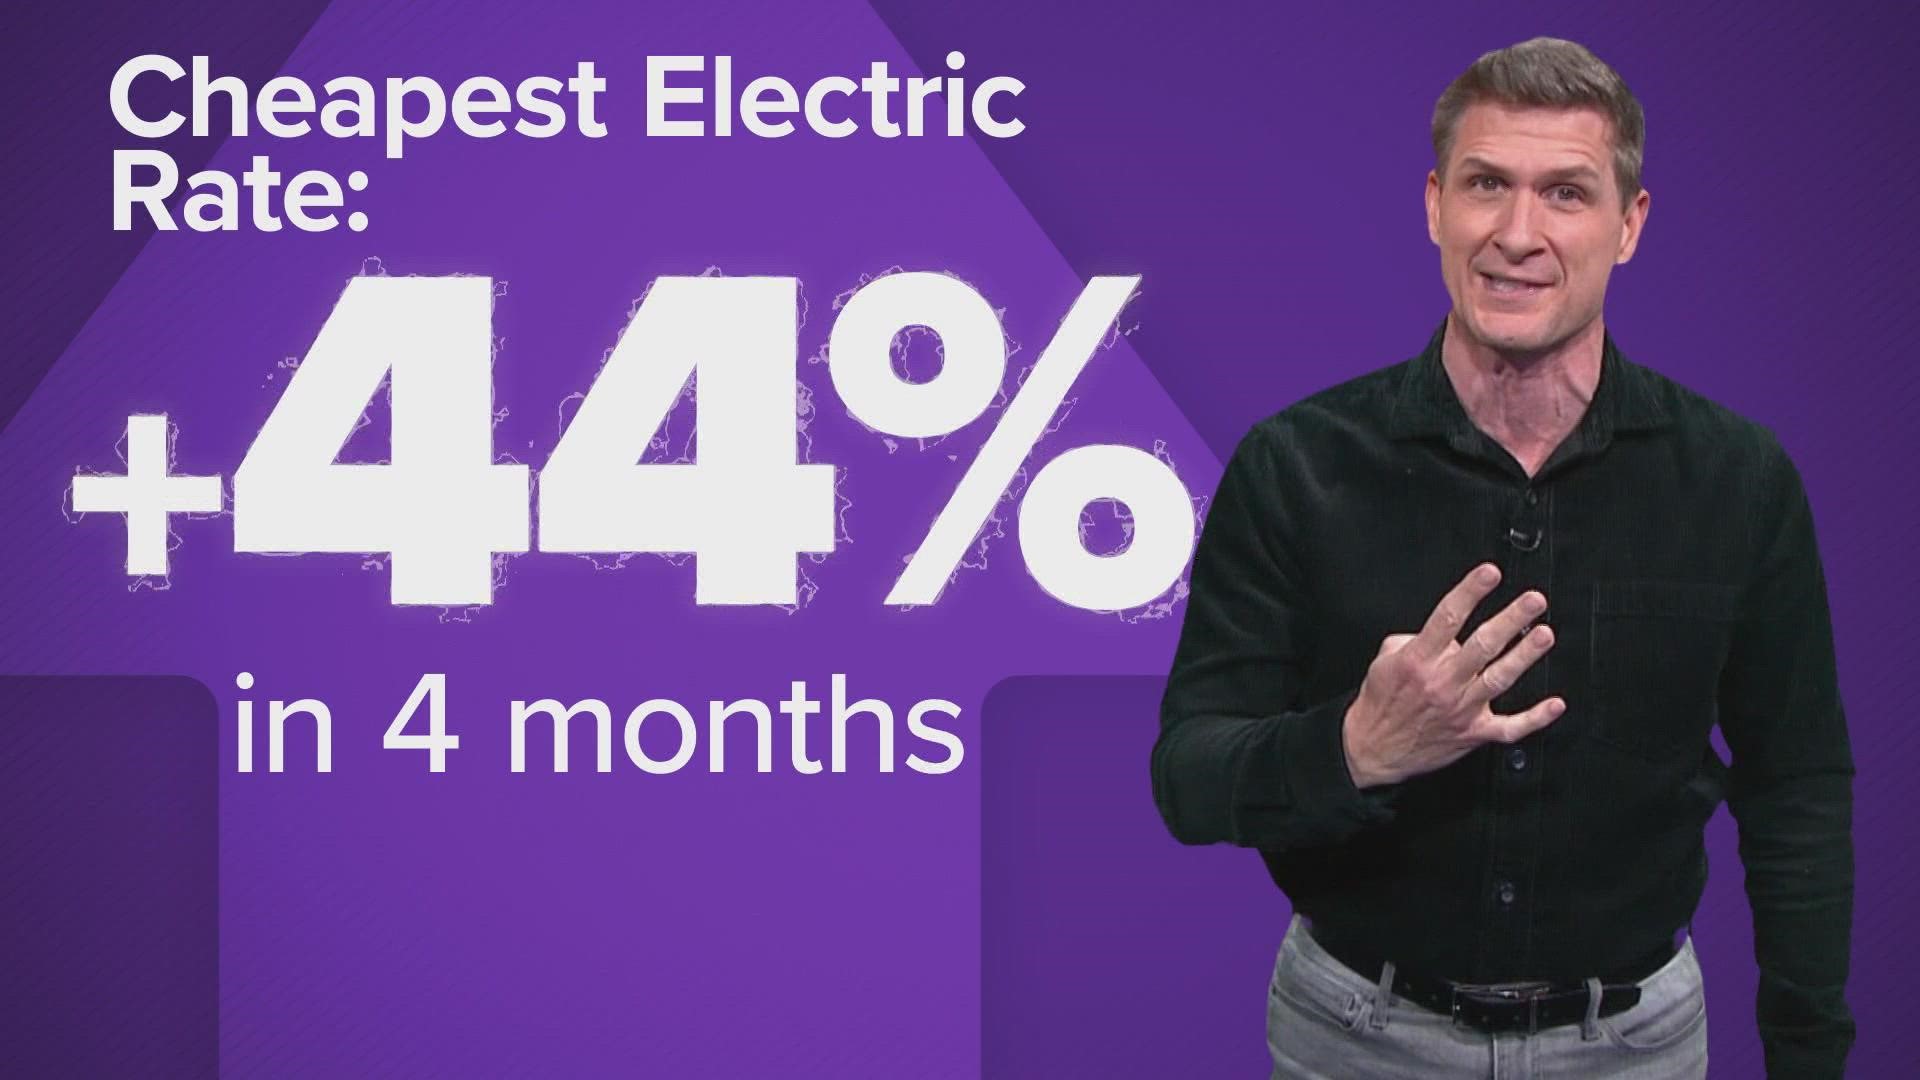 Nationally renowned energy expert Ed Hirs talks about what is causing high electric rates, and what he plans to do when he shops for a new agreement in July.